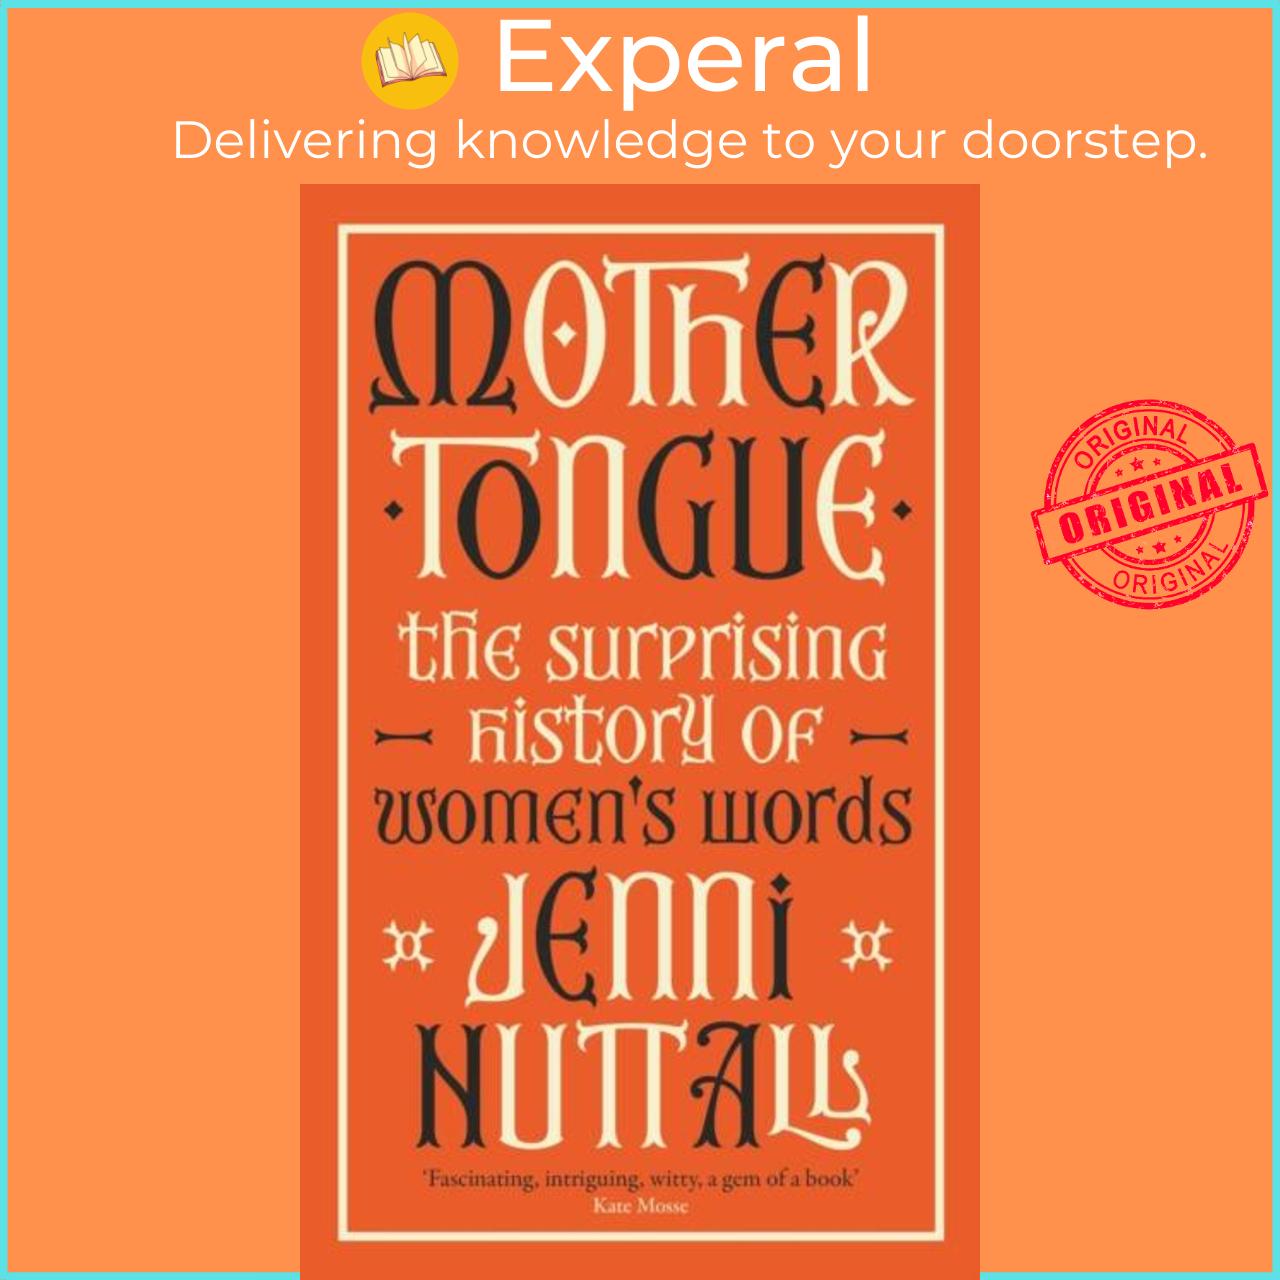 Sách - Mother Tongue - The surprising history of women's words -'Fascinating, i by Jenni Nuttall (UK edition, hardcover)